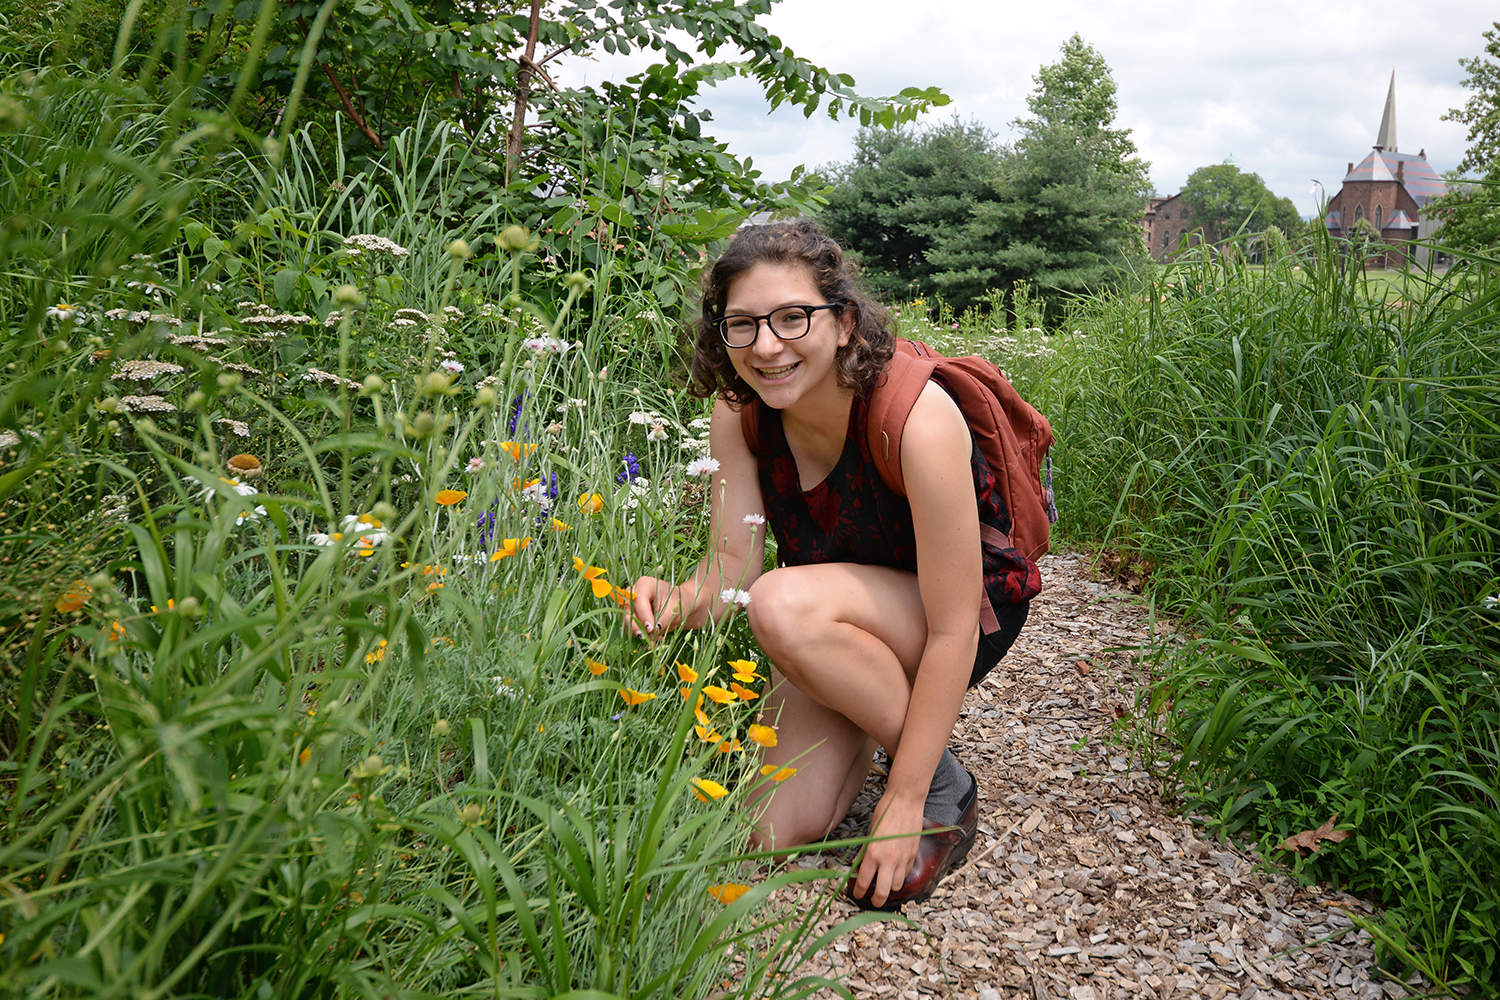 Heather Whittemore ’17, who is working on campus this summer, enjoys occasional strolls through the WestCo. courtyard. “I like to check out what’s blooming,” she said. 